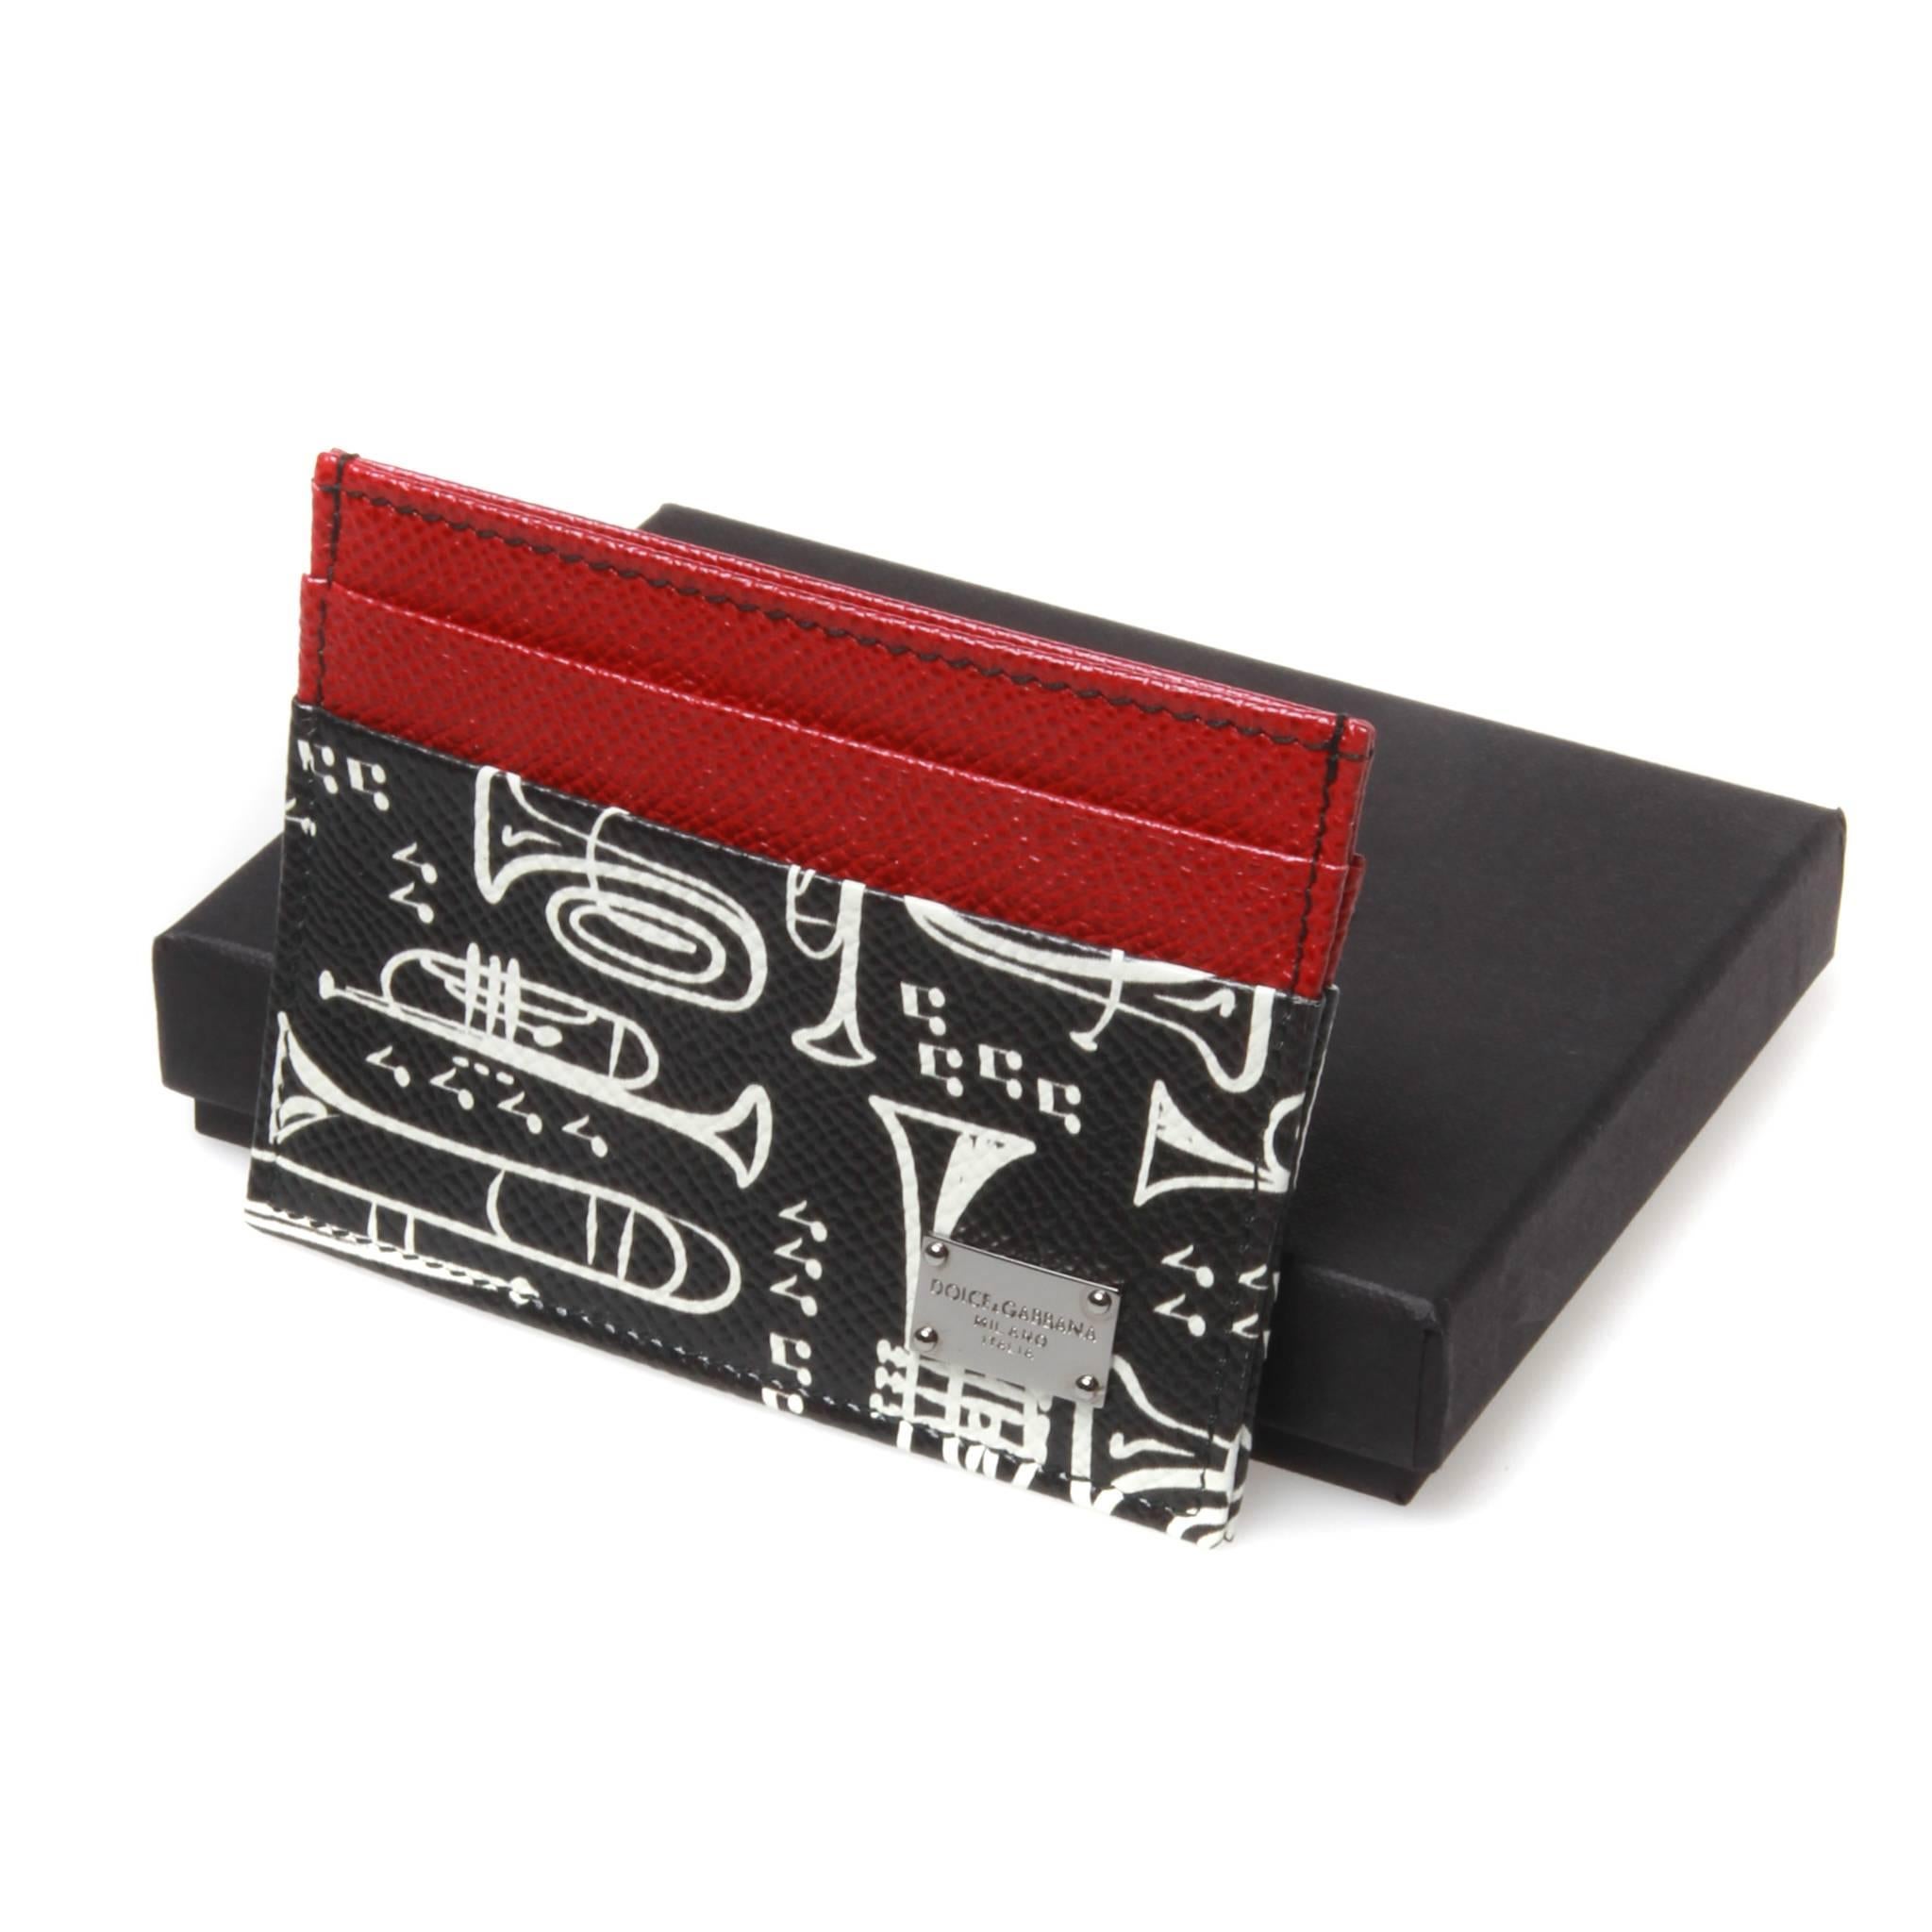 Final Sale

Dolce and Gabbana grain calf leather card holder featuring a black and white musical instrument graphic and red contrast panels. Two card slots and one central slip for notes and receipts. Silver-tone plaque affixed to front side. 